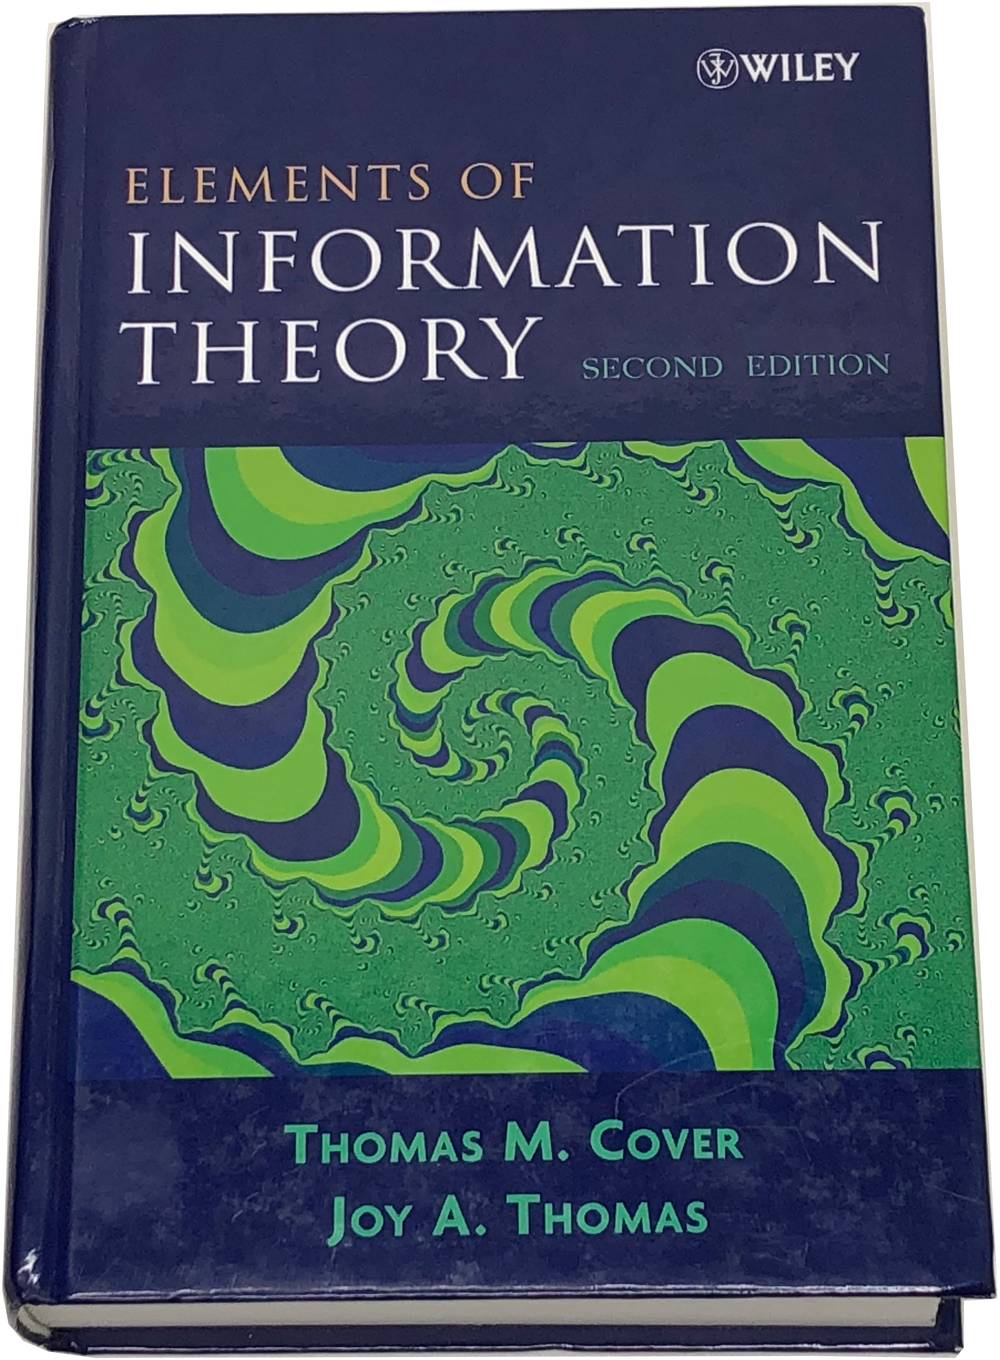 Book image of Elements of Information Theory.